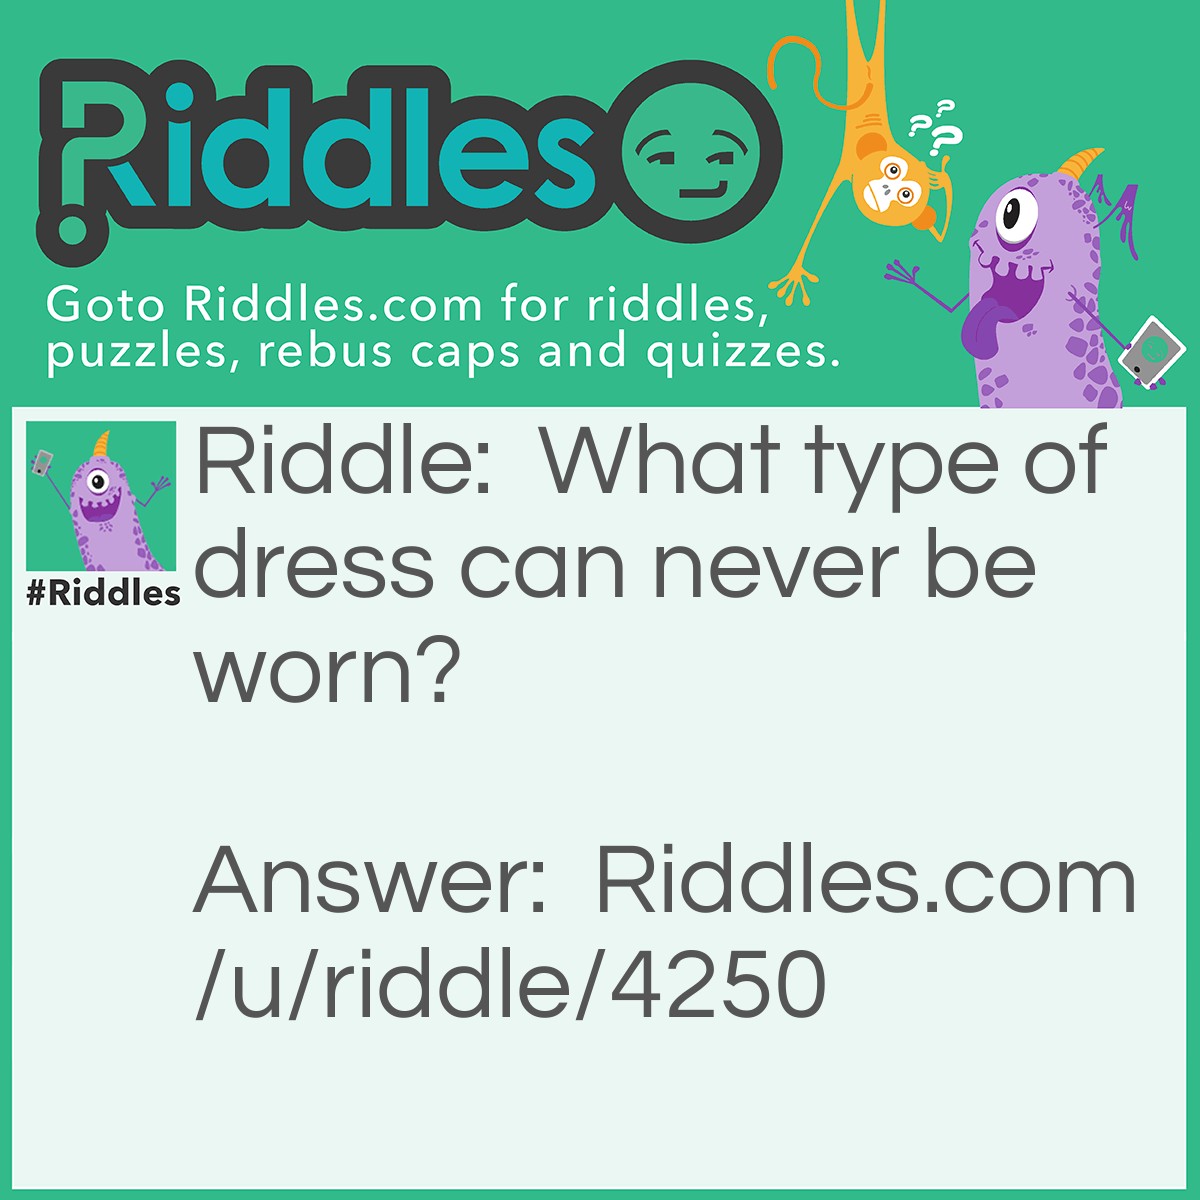 Riddle: What type of dress can never be worn? Answer: An address.